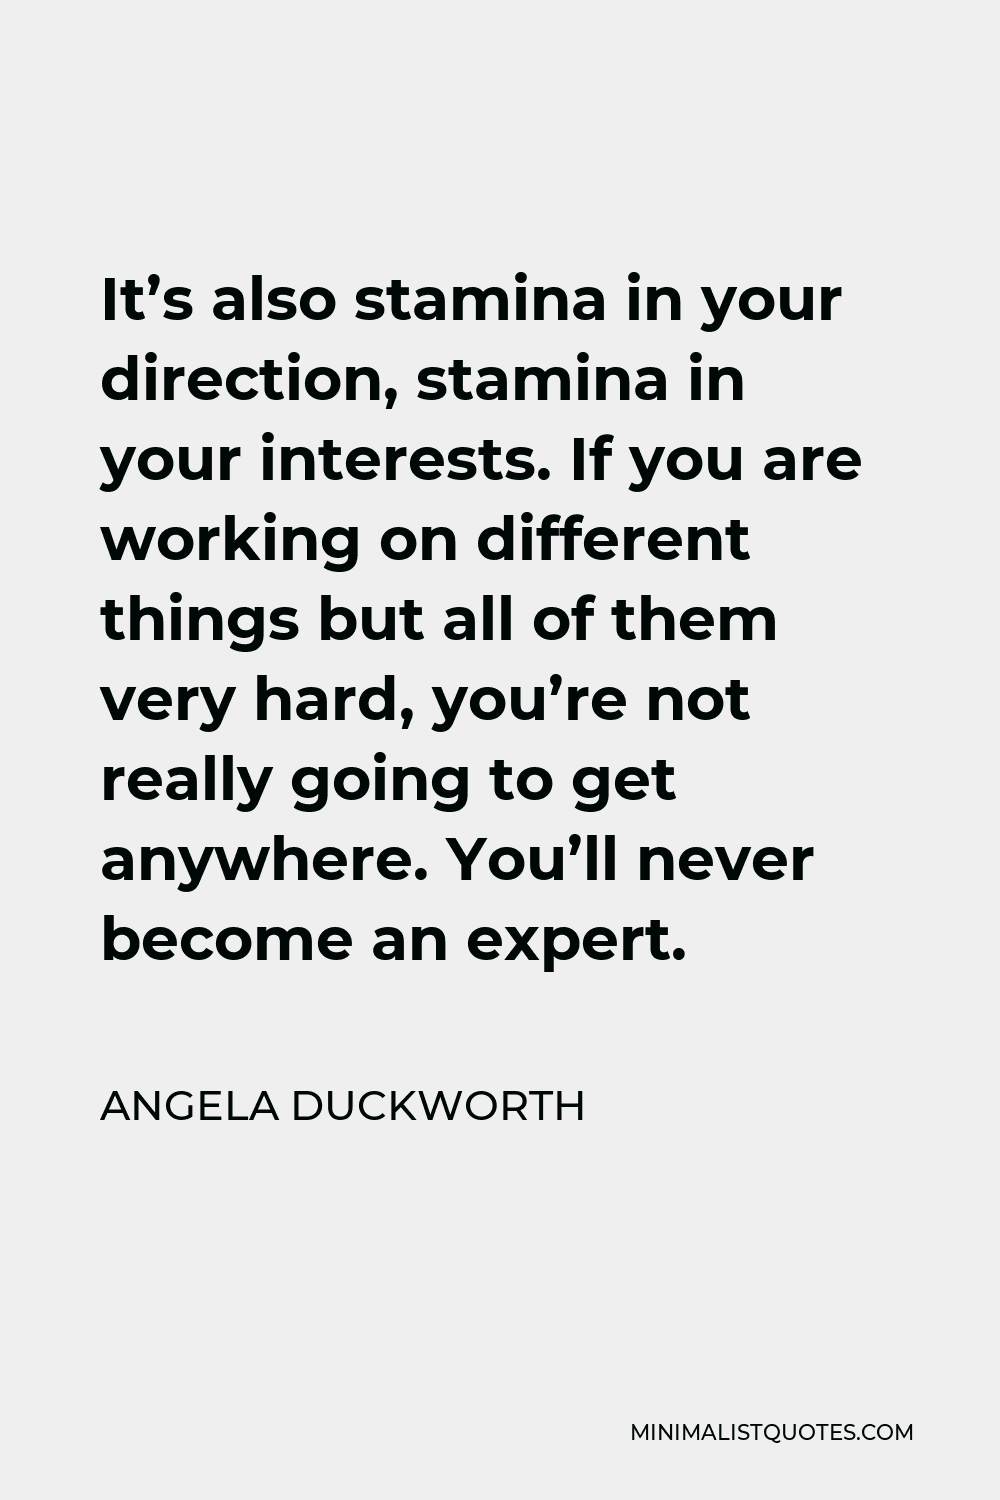 Angela Duckworth Quote - It’s also stamina in your direction, stamina in your interests. If you are working on different things but all of them very hard, you’re not really going to get anywhere. You’ll never become an expert.